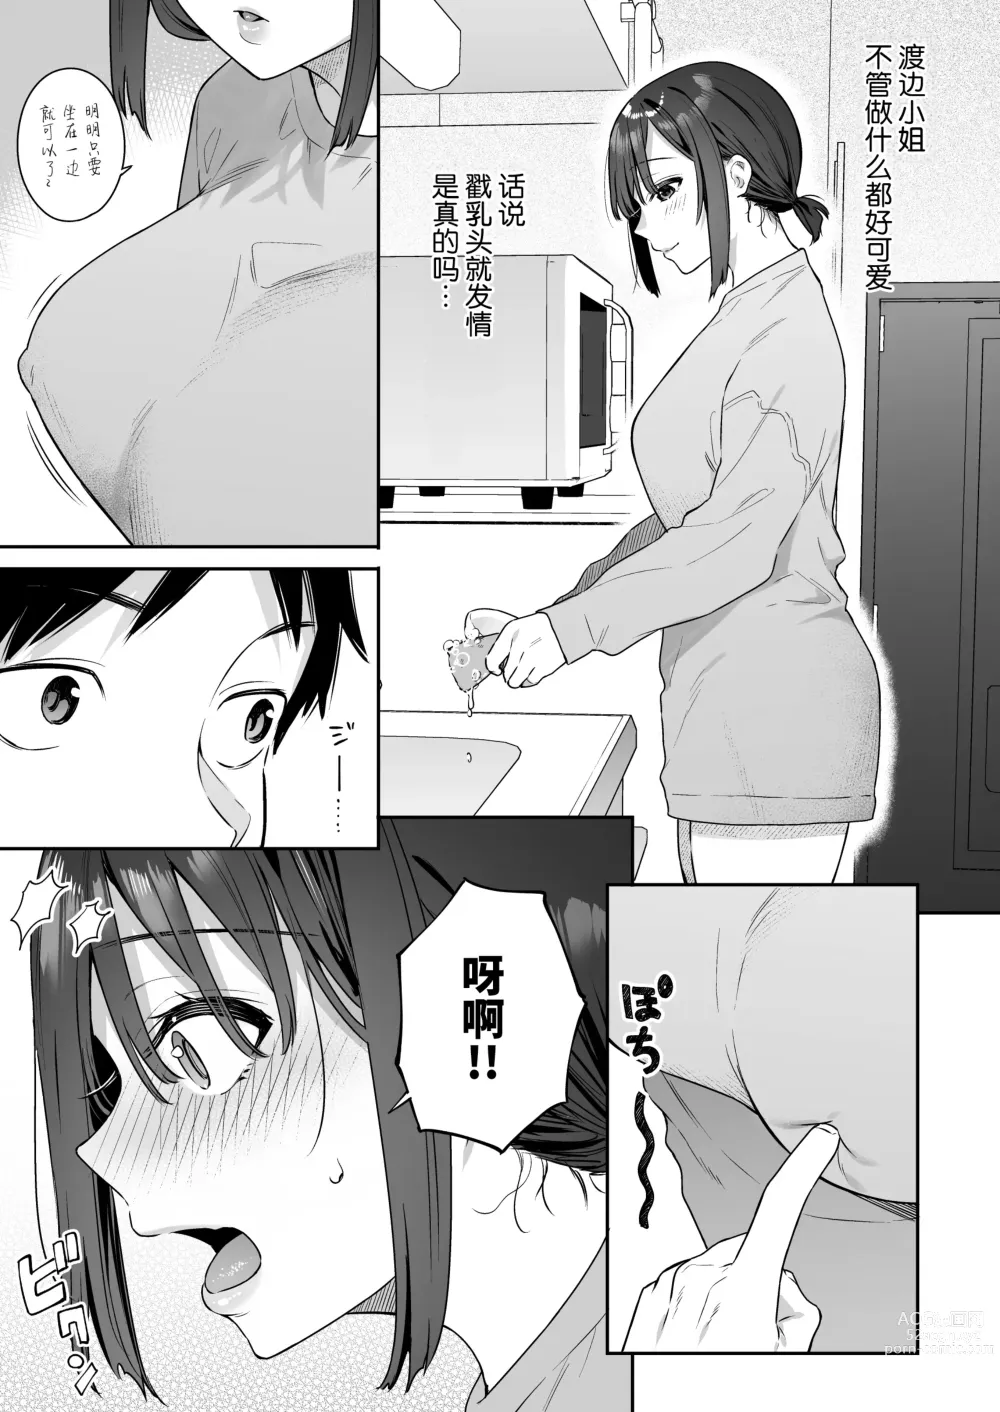 Page 38 of doujinshi 她的发情开关